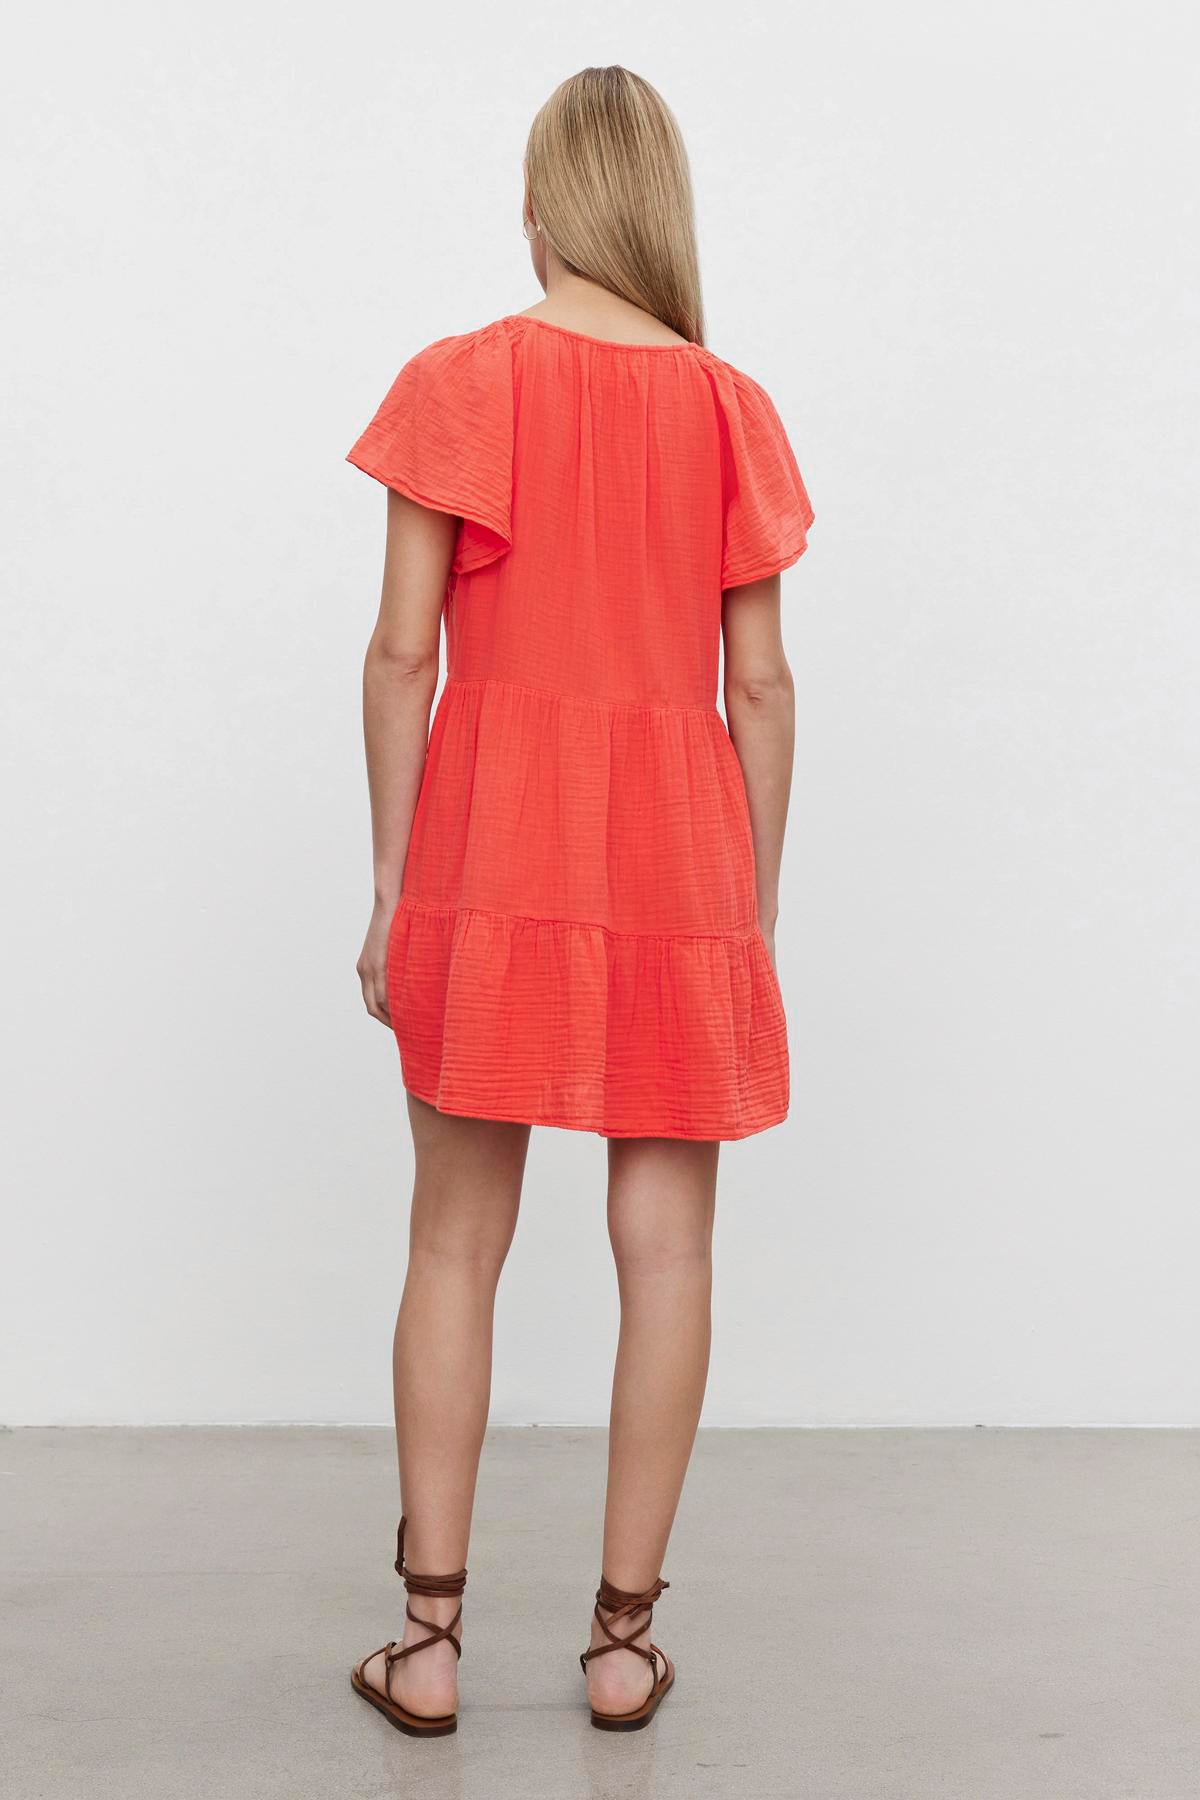   A woman from behind wearing a bright orange, short-sleeved Velvet by Graham & Spencer ELEANOR COTTON GAUZE TIERED DRESS, standing in a room with a white wall. 